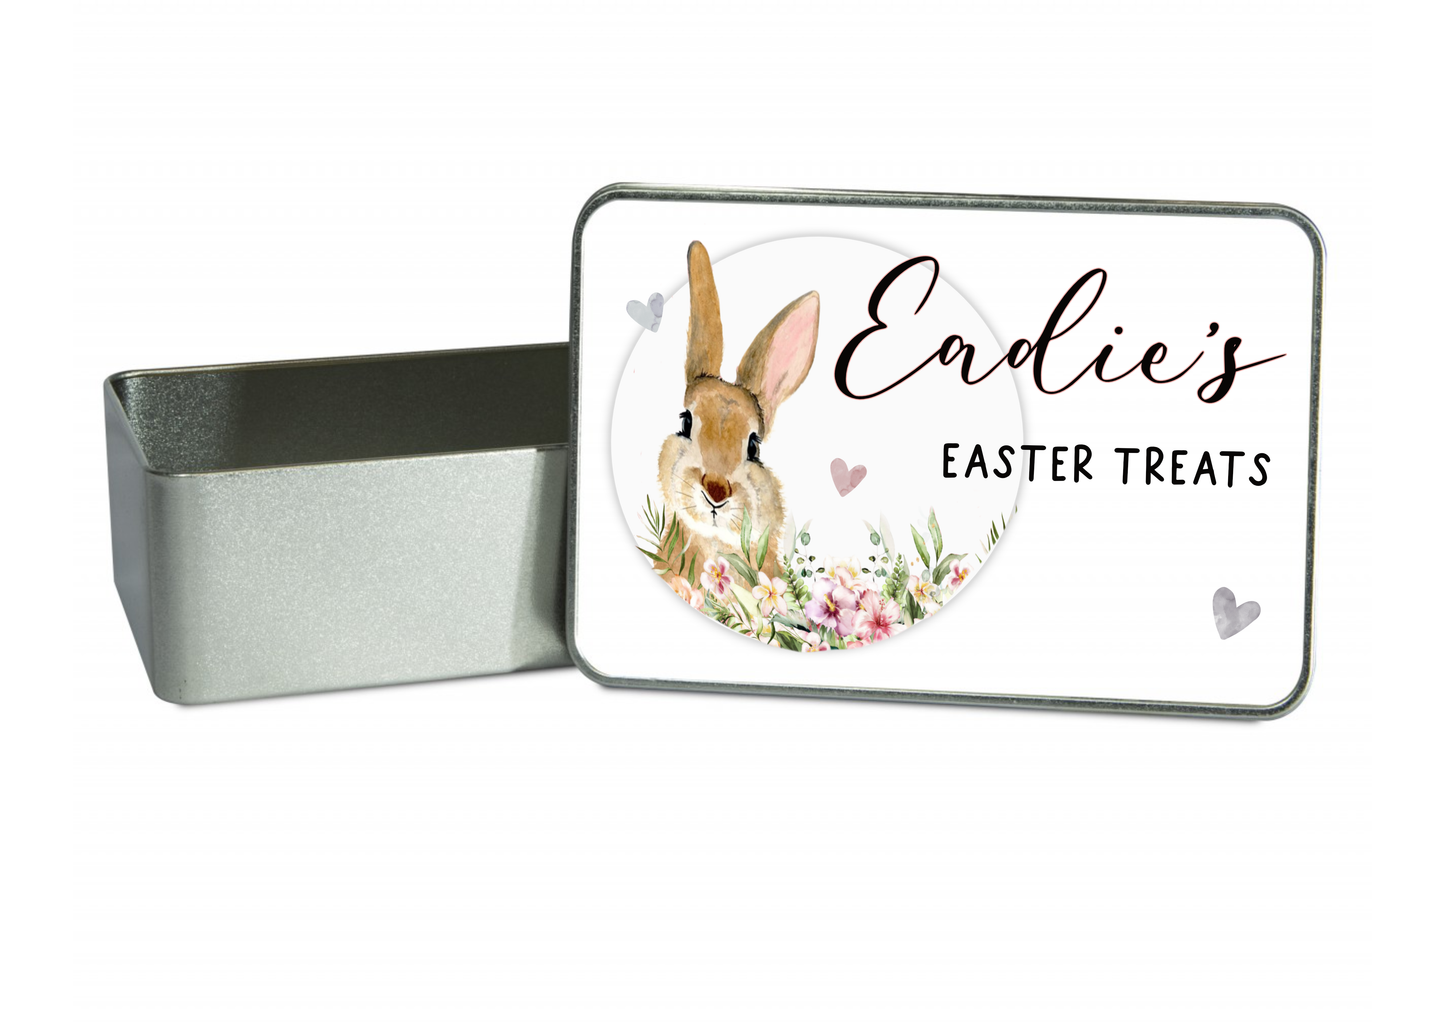 Silver tin with a white push down lid featuring a beautiful floral bunny design with hearts & the quote 'name - easter treats'.